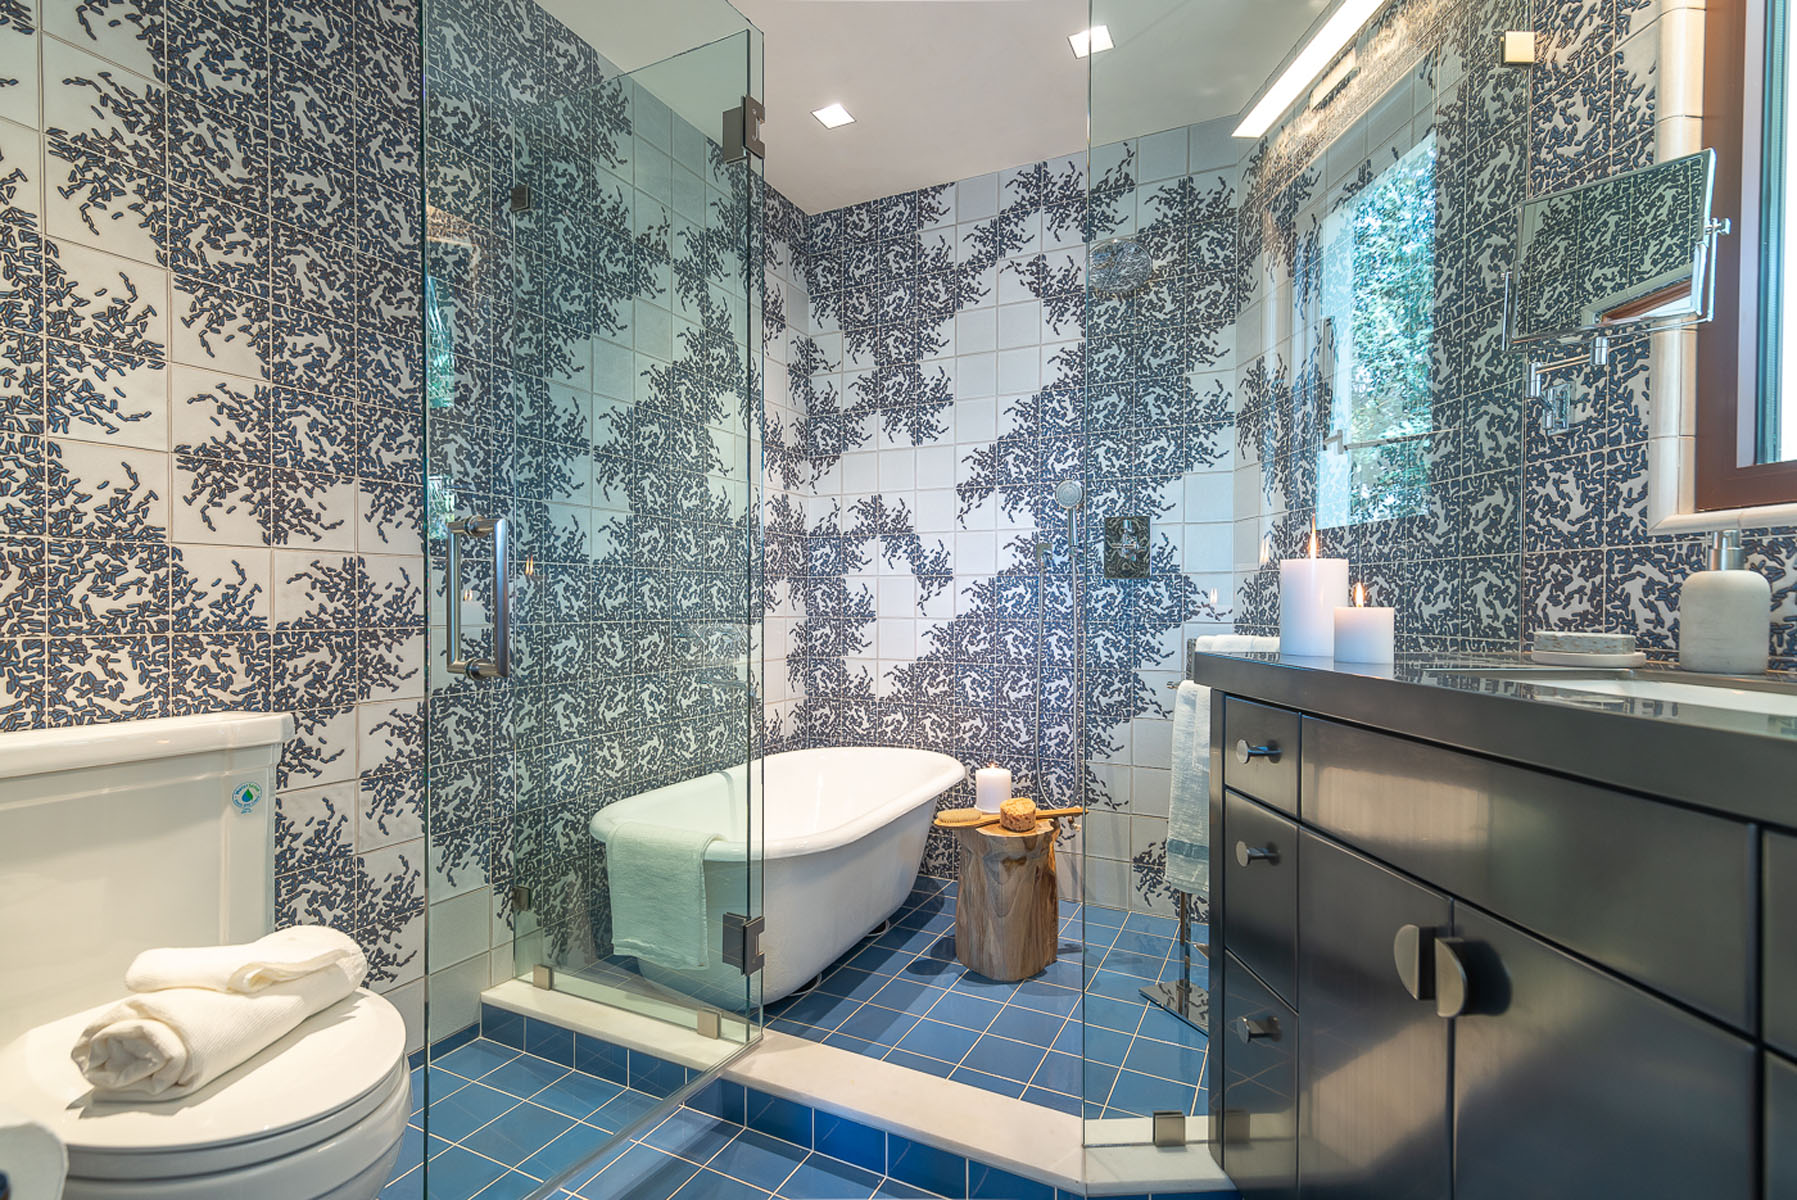 Bathroom with white fixture and irregularly patterned white and navy tile - photo